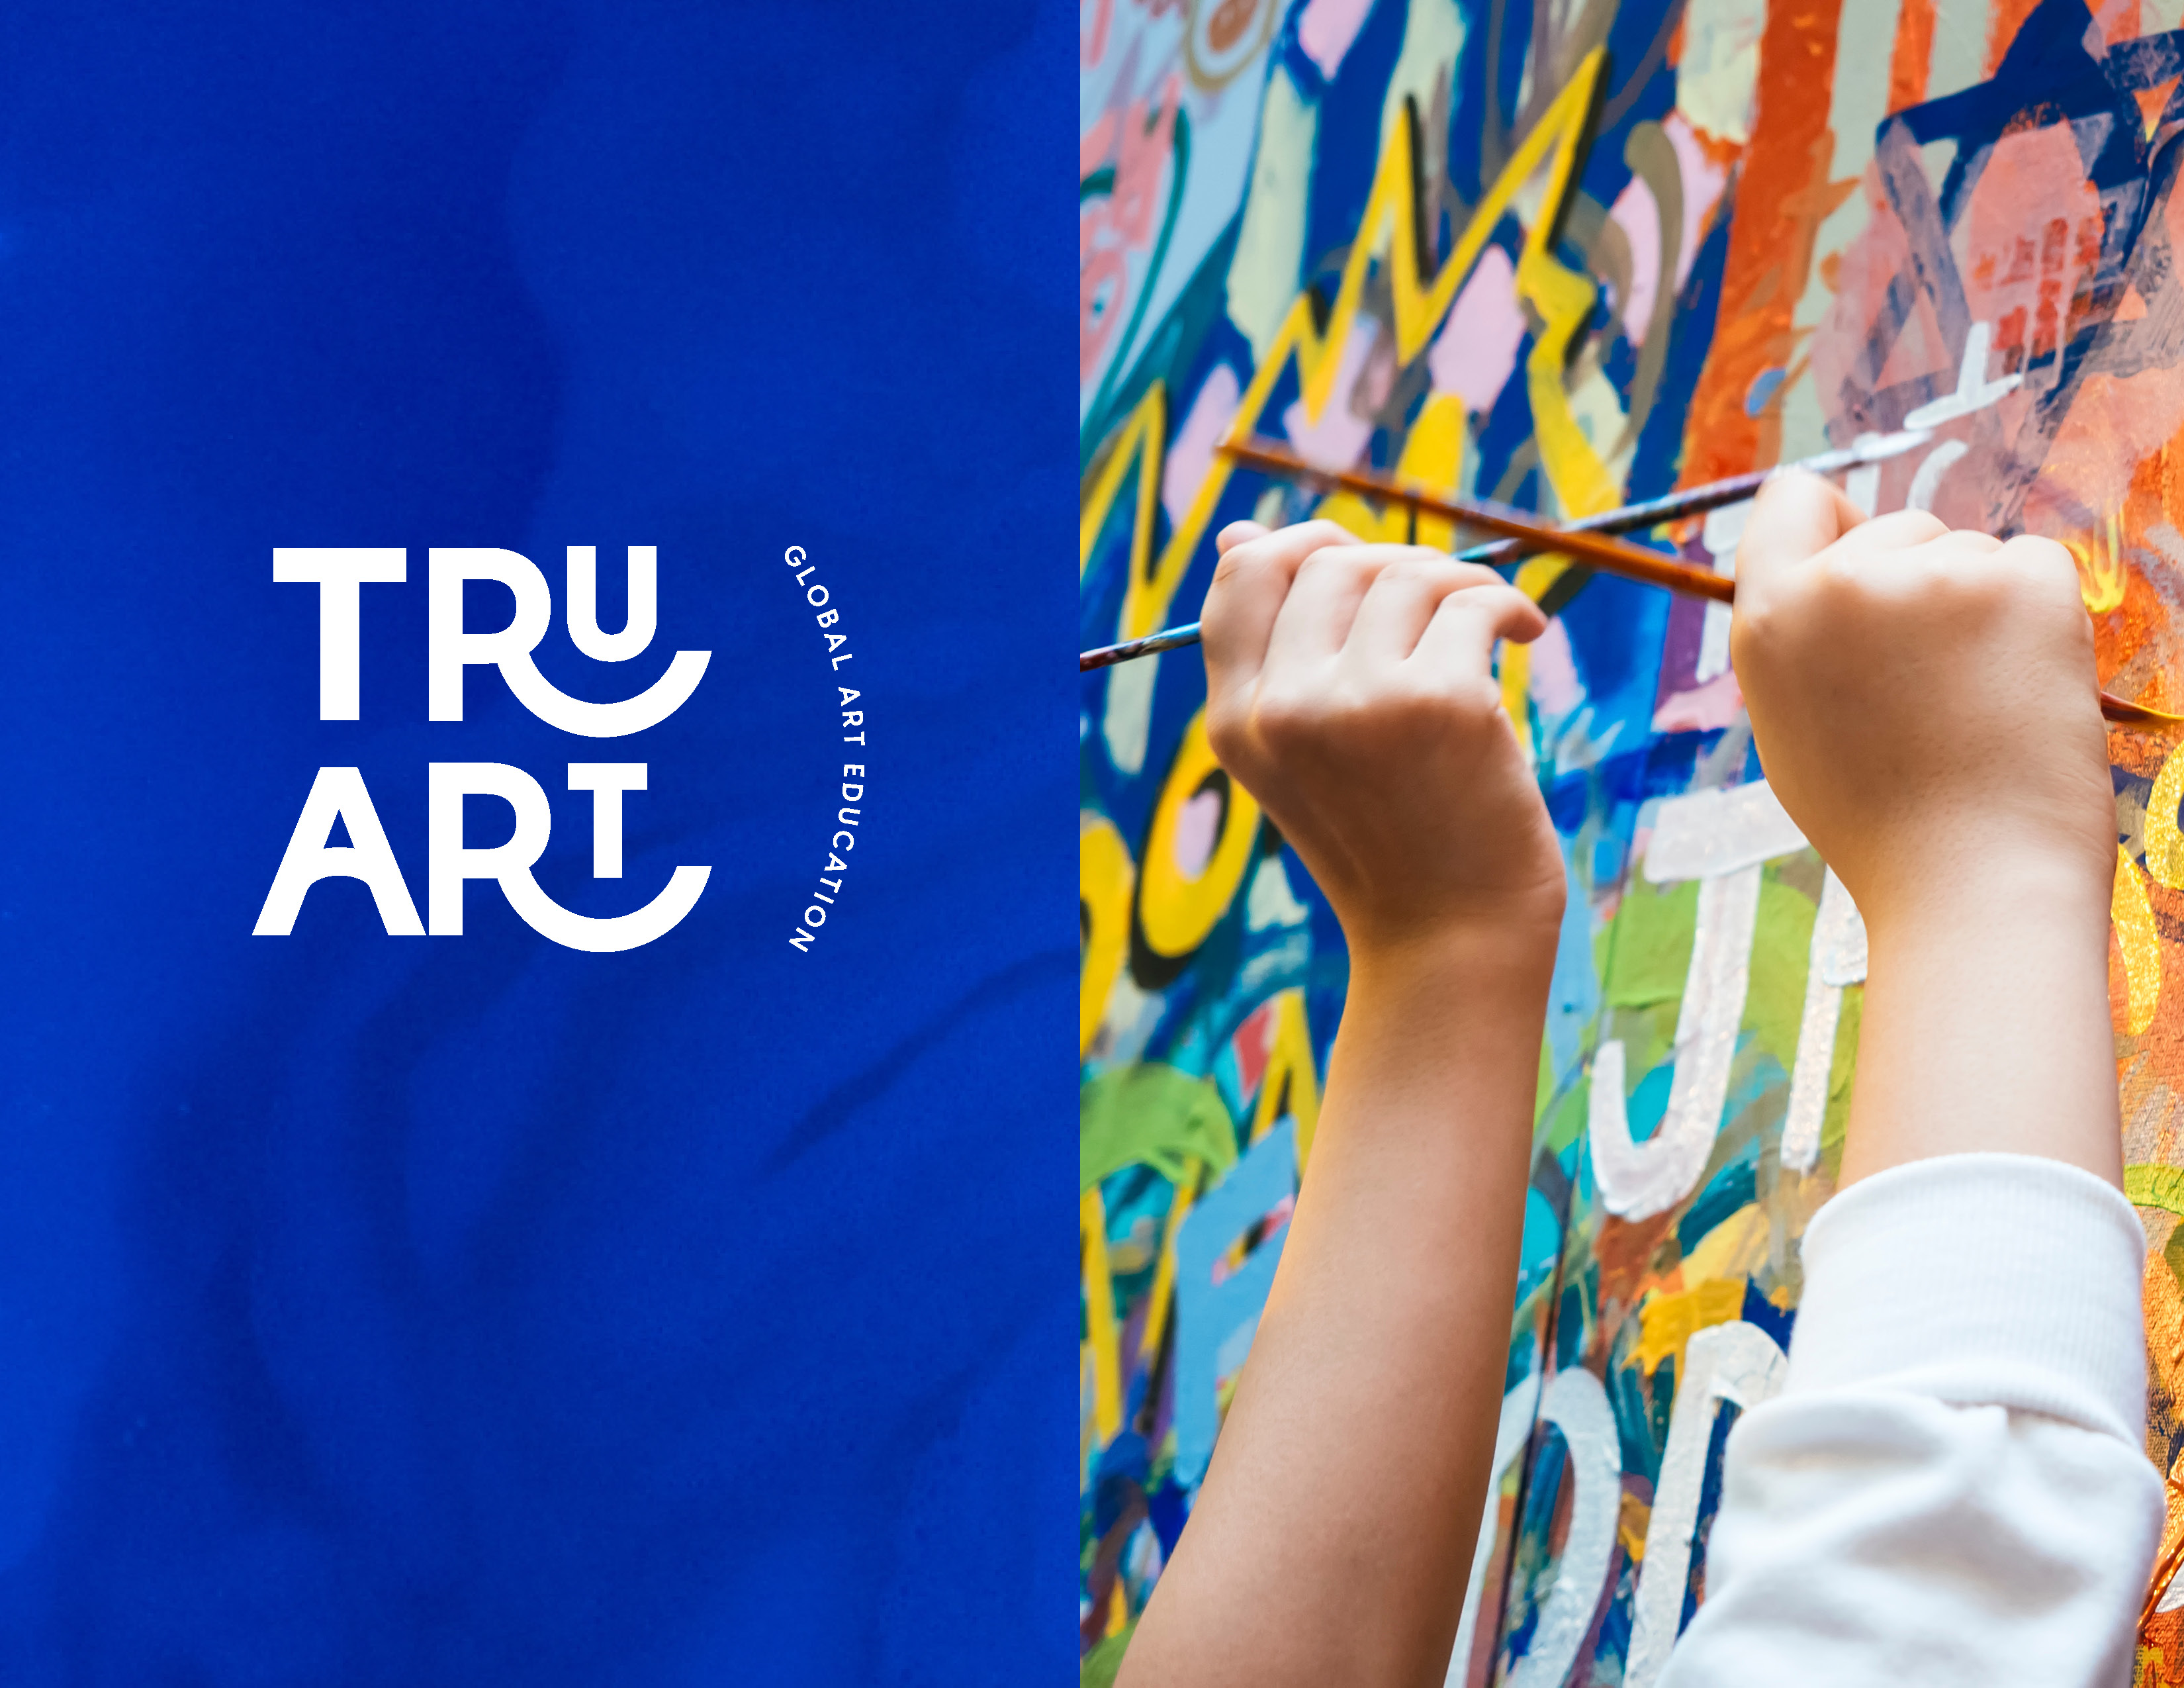 TruArt Playful Branding Fueling Young Artistic Dreams